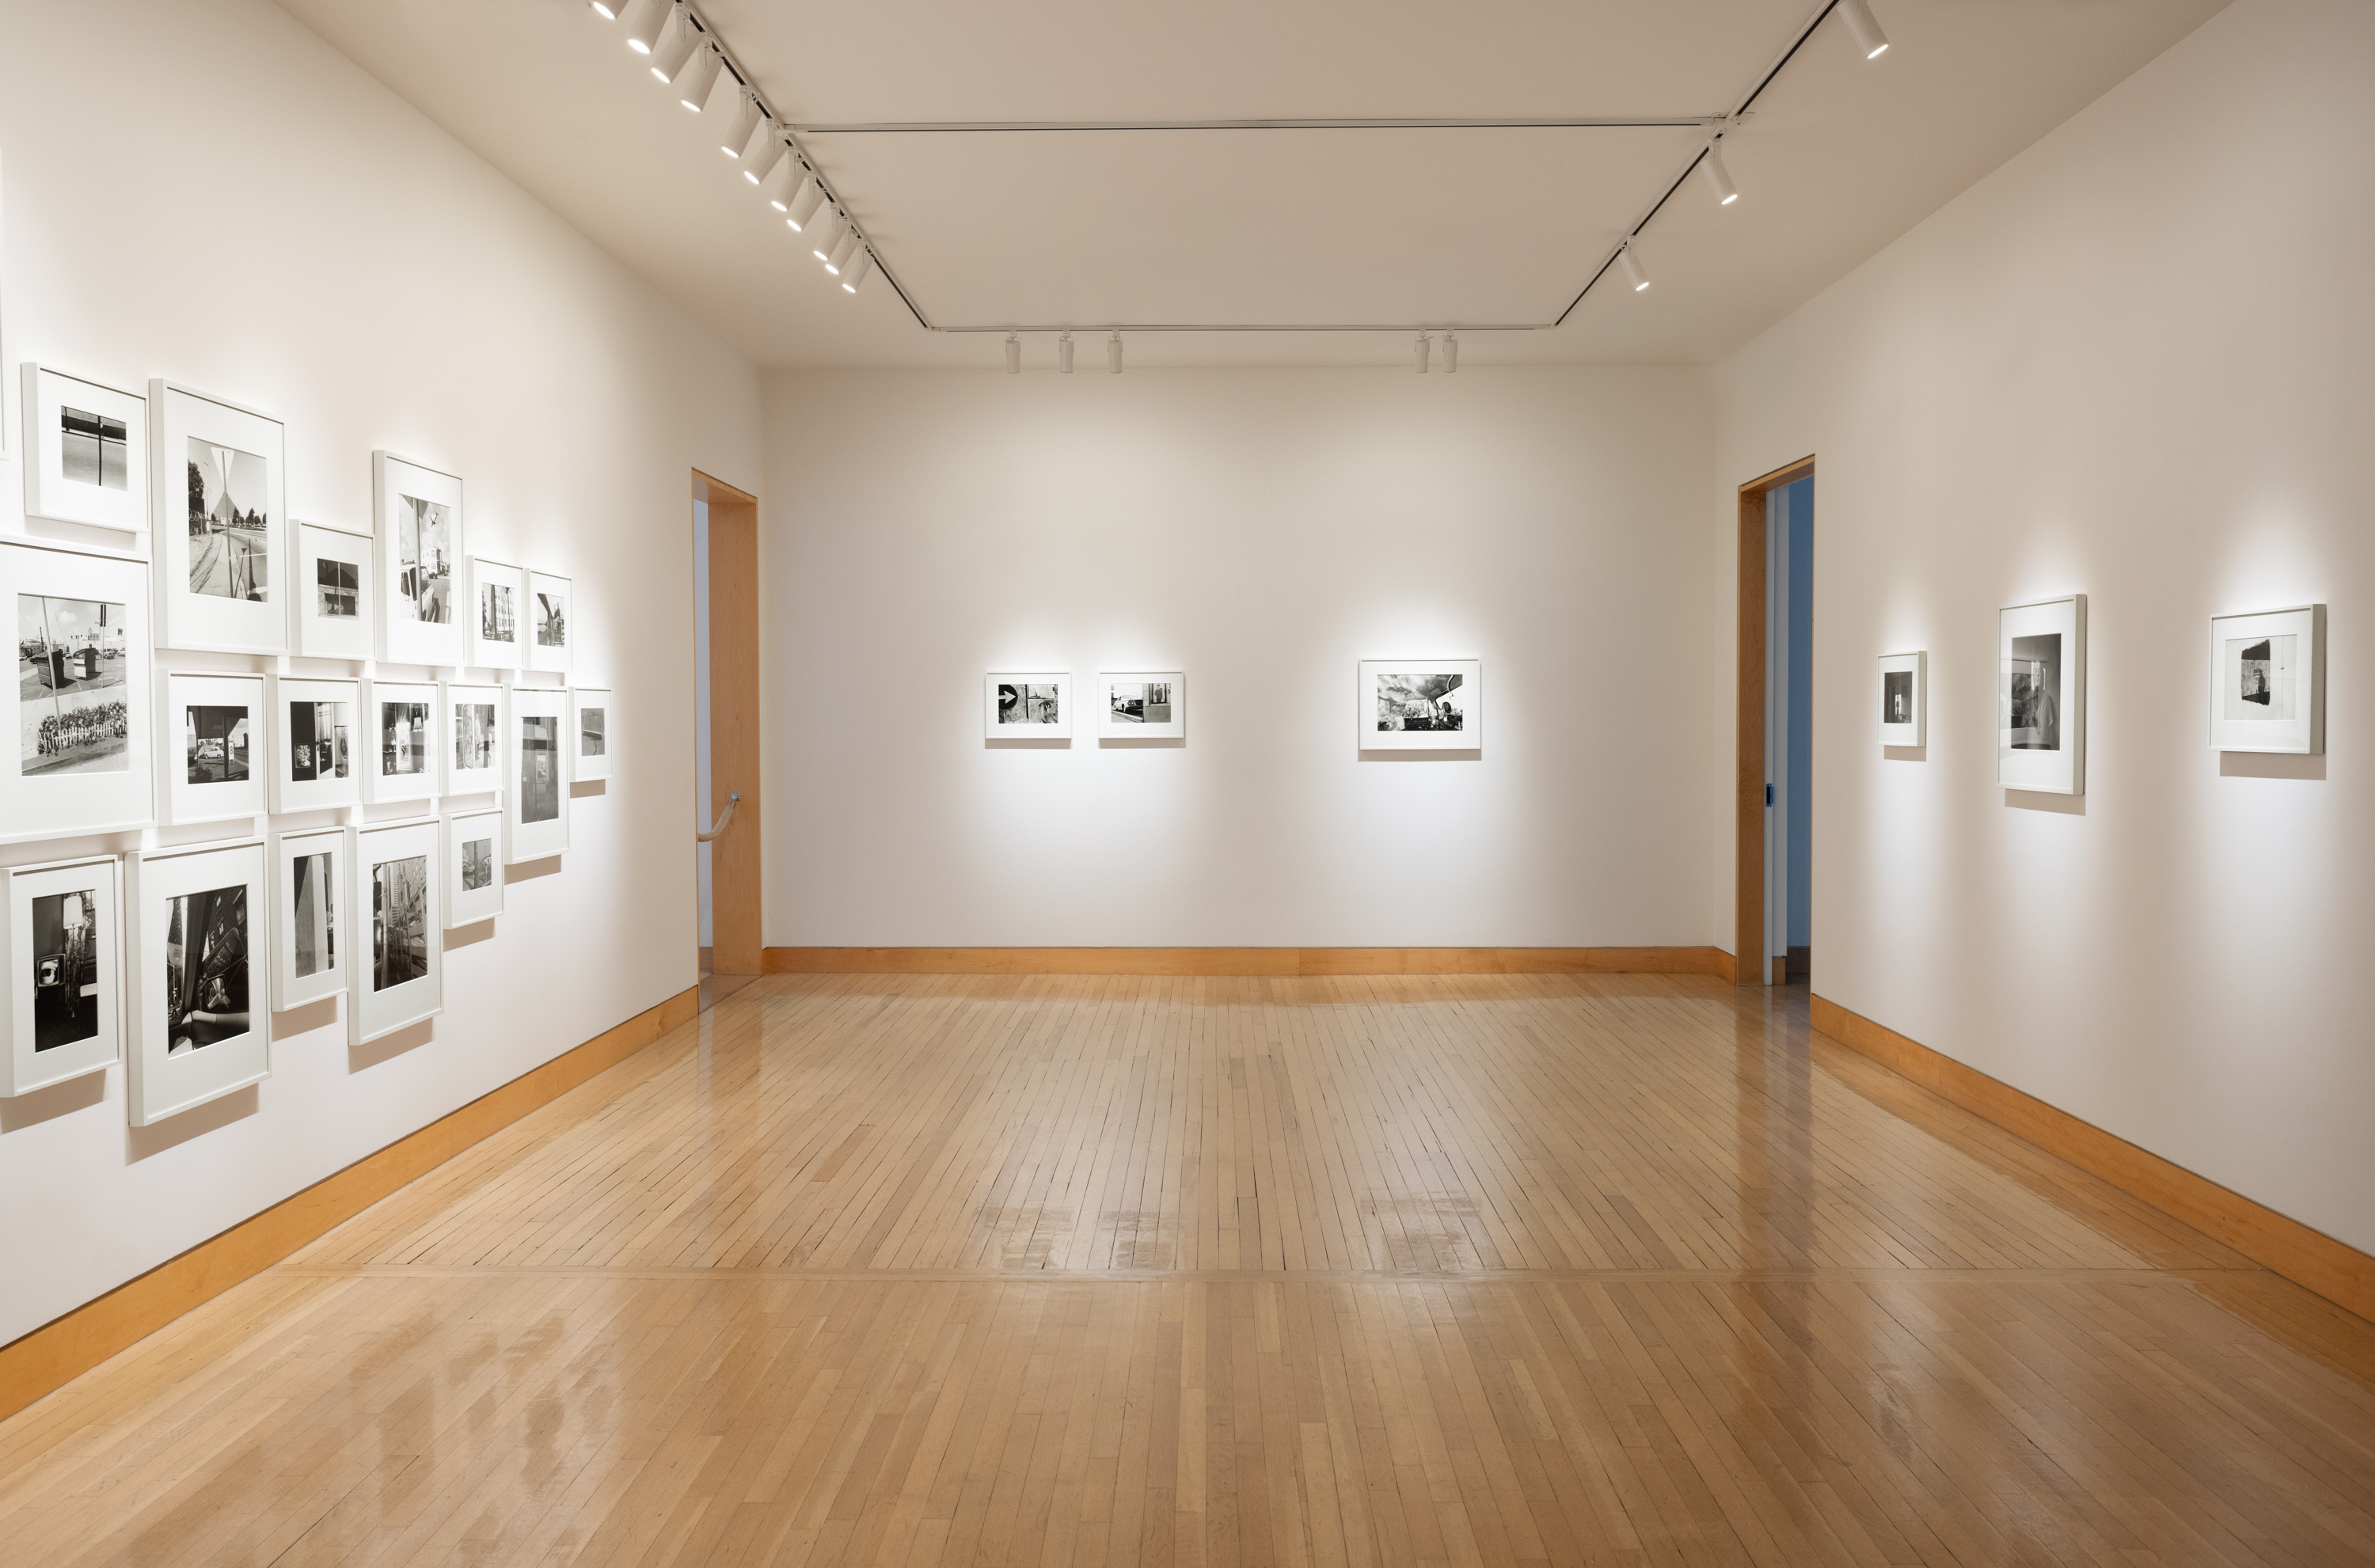 Color image of a gallery exhibiting black and white photographs of various sizes on white gallery walls